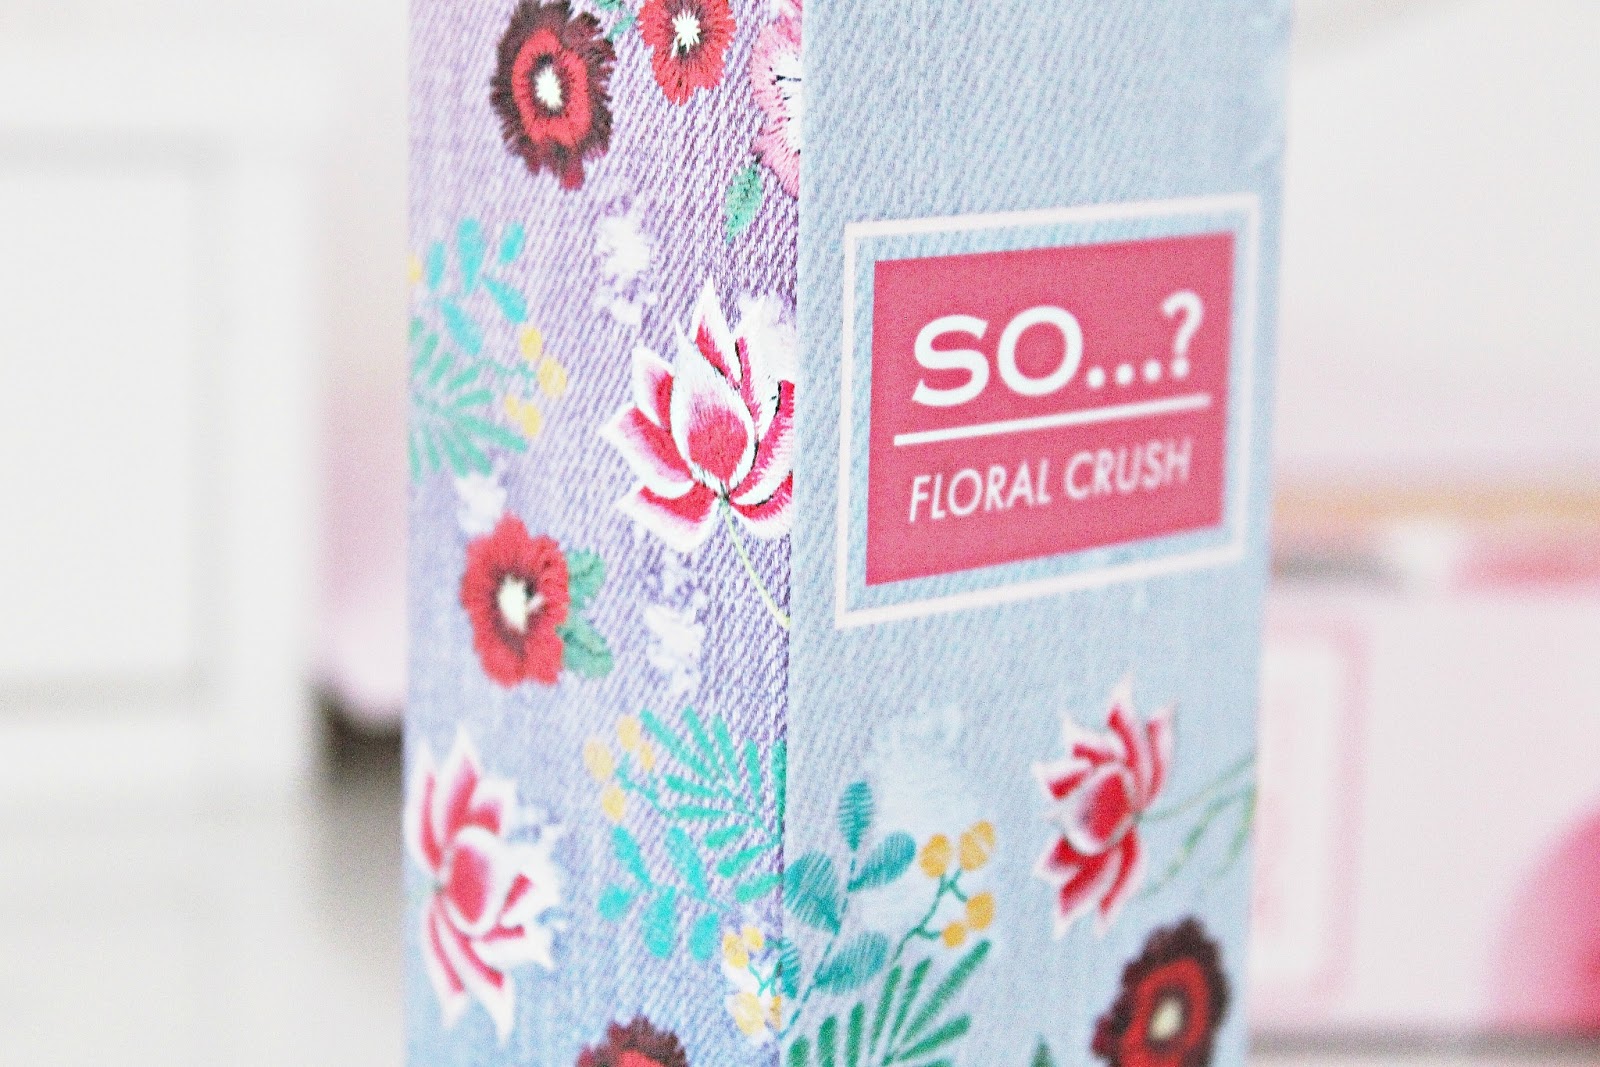 So Fragrance EDP beauty review